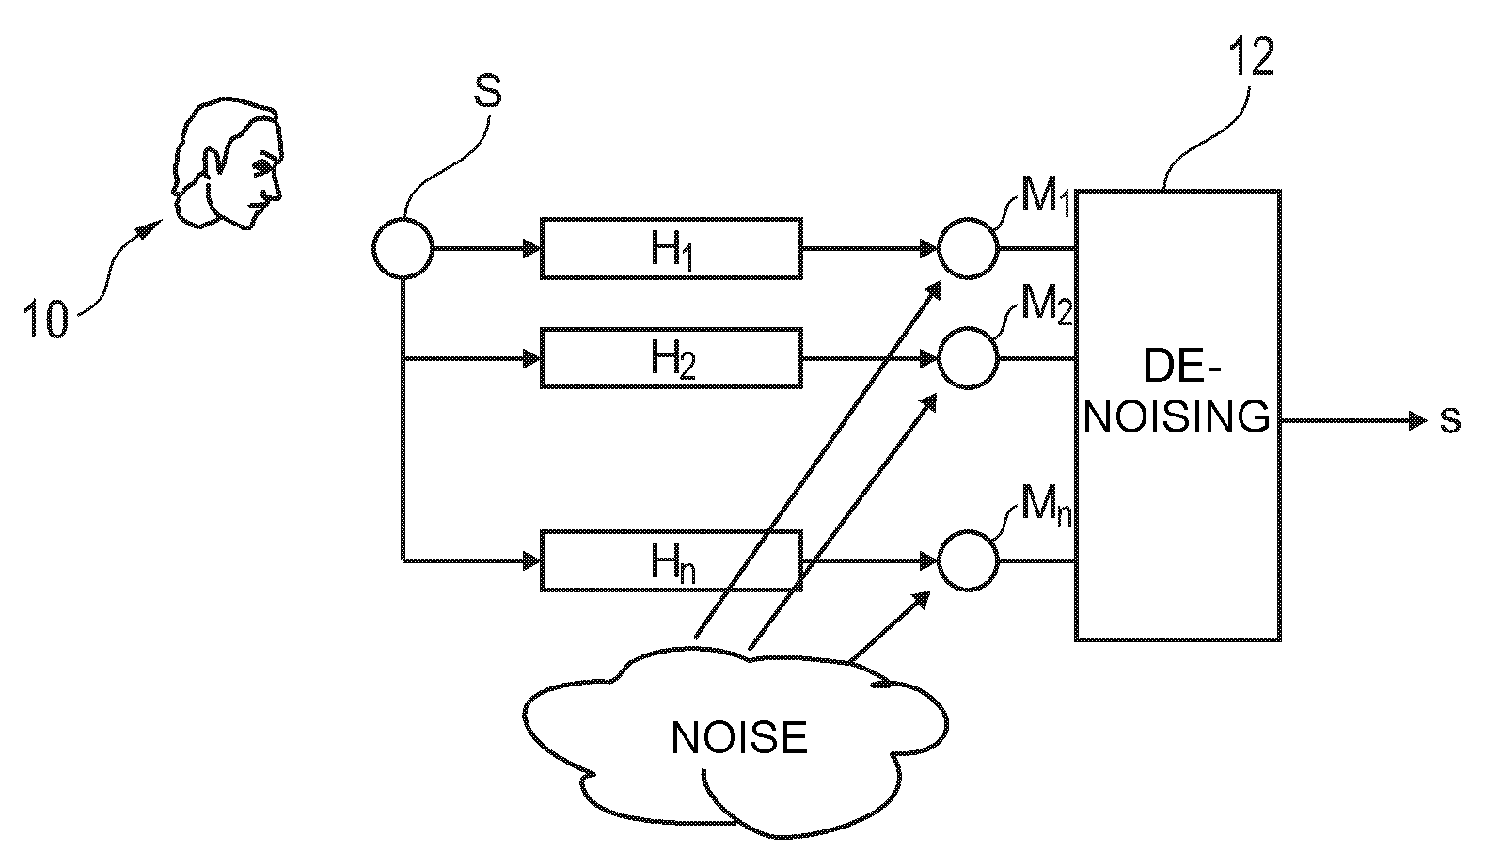 De-noising method for multi-microphone audio equipment, in particular for a "hands free" telephony system